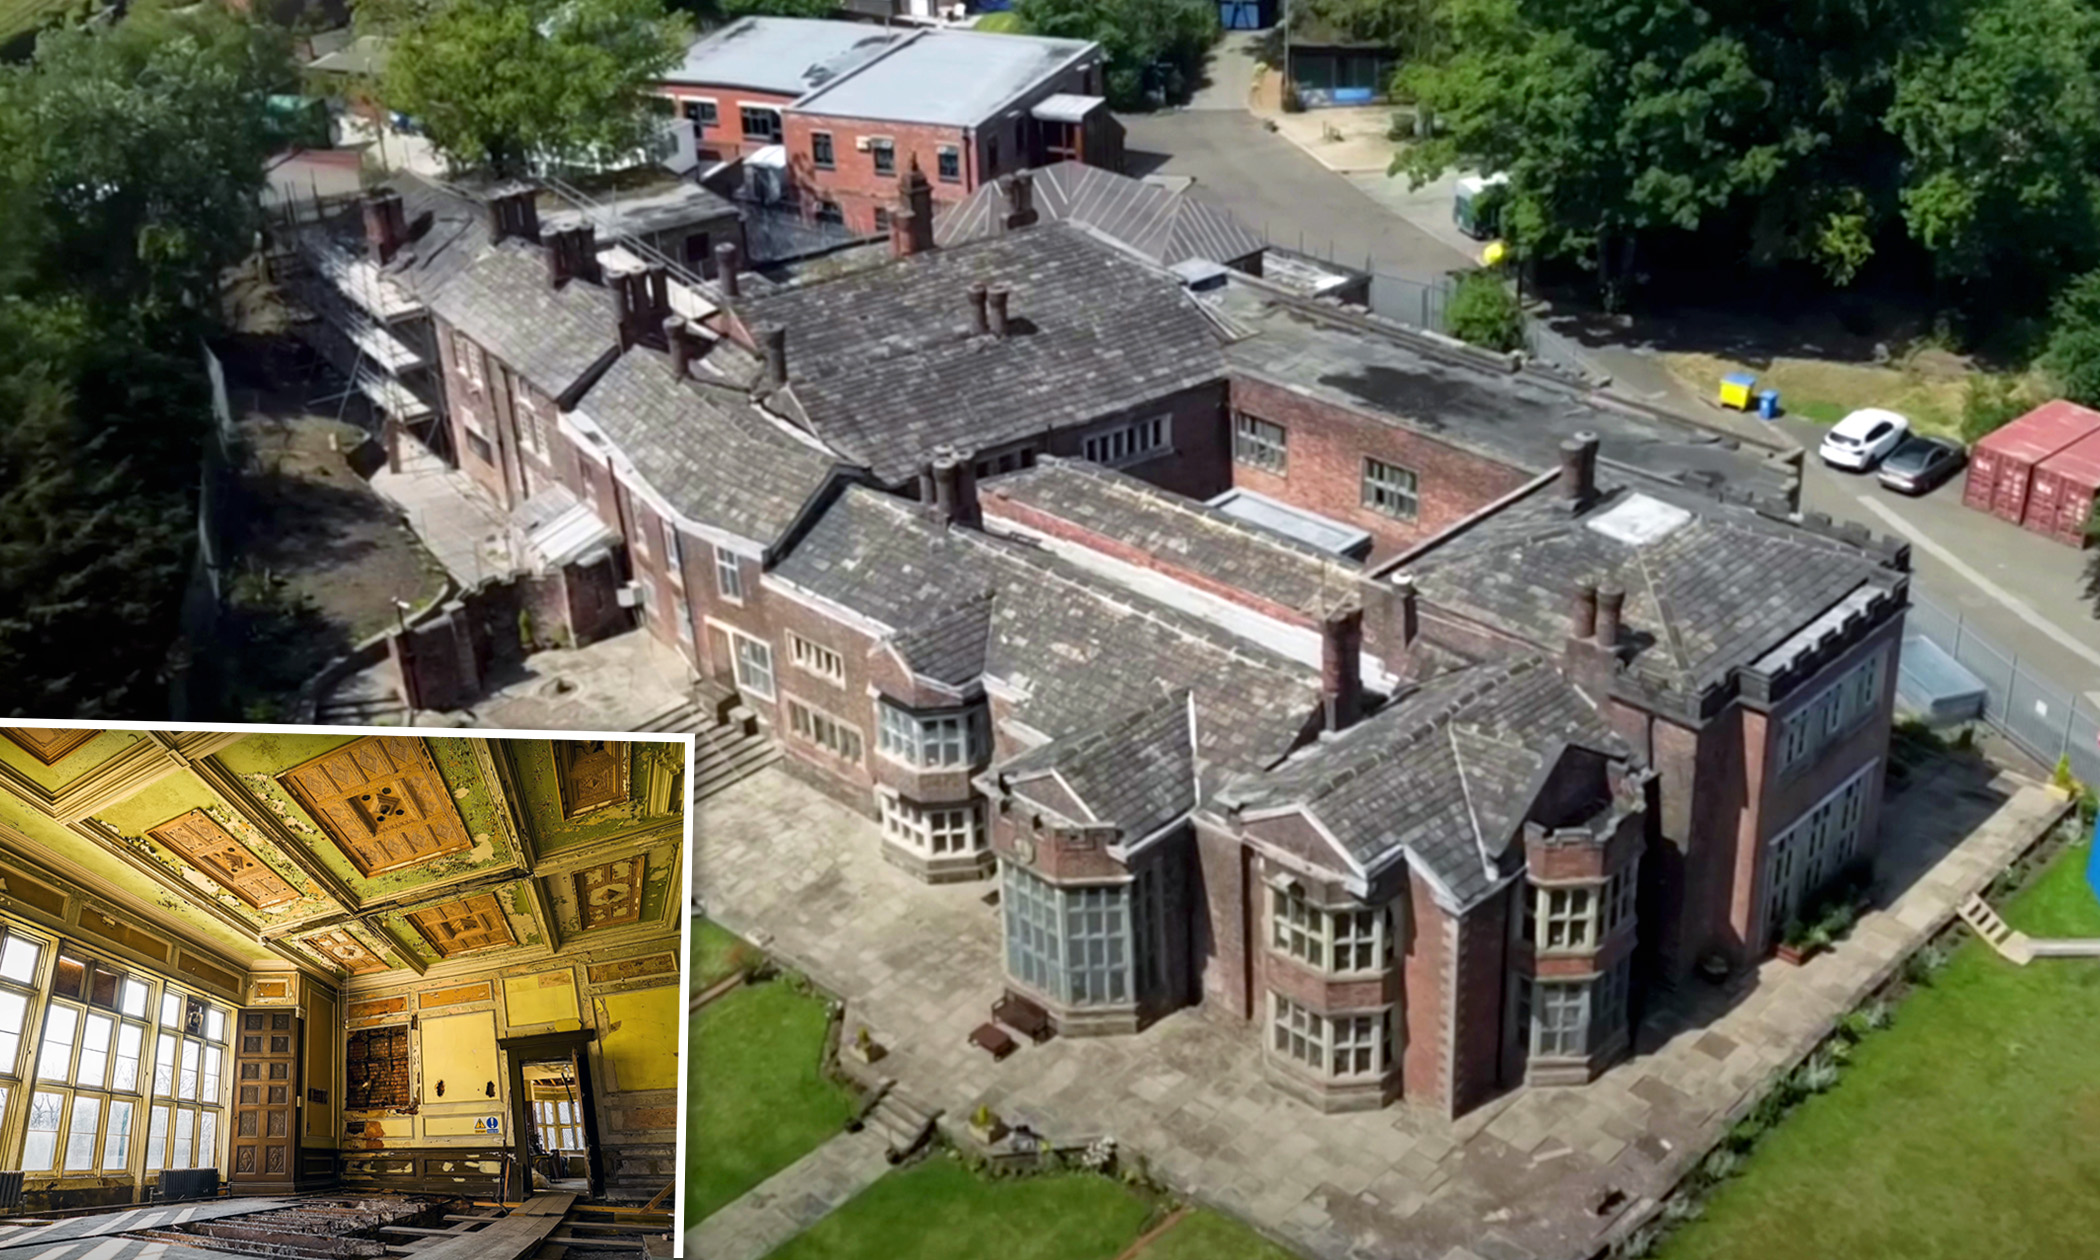 American Actor Moves to England to Renovate 600-Year-Old Derelict Hall Belonging to His Ancestors